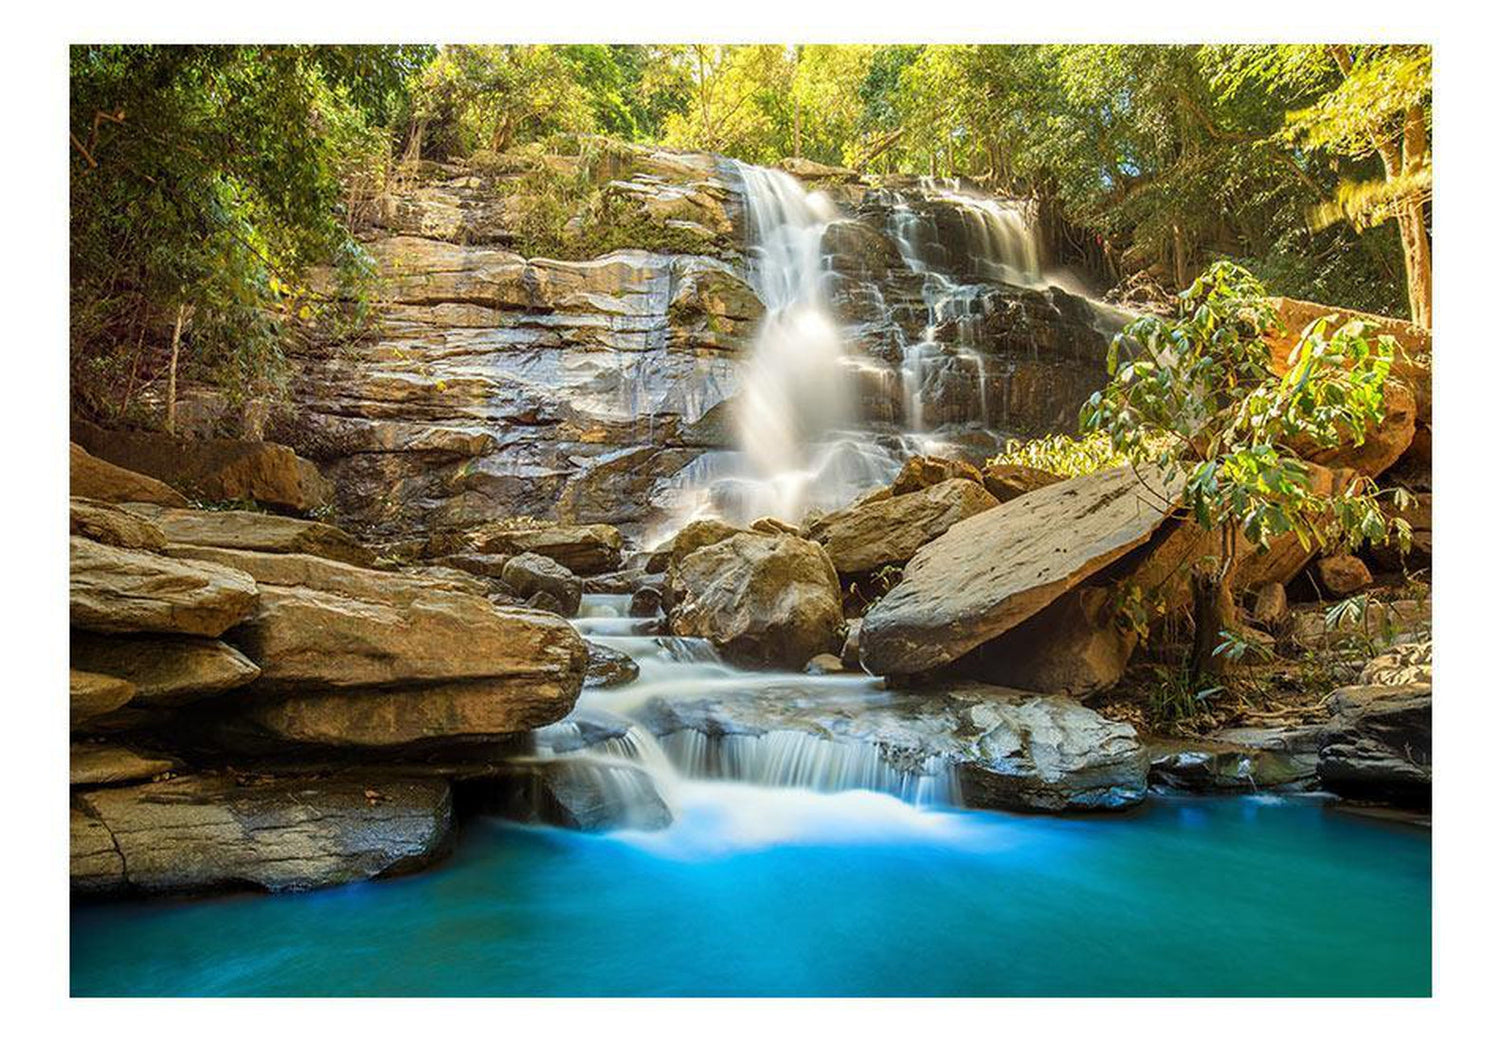 Peel and stick wall mural - Waterfall in Chiang Mai, Thailand-TipTopHomeDecor